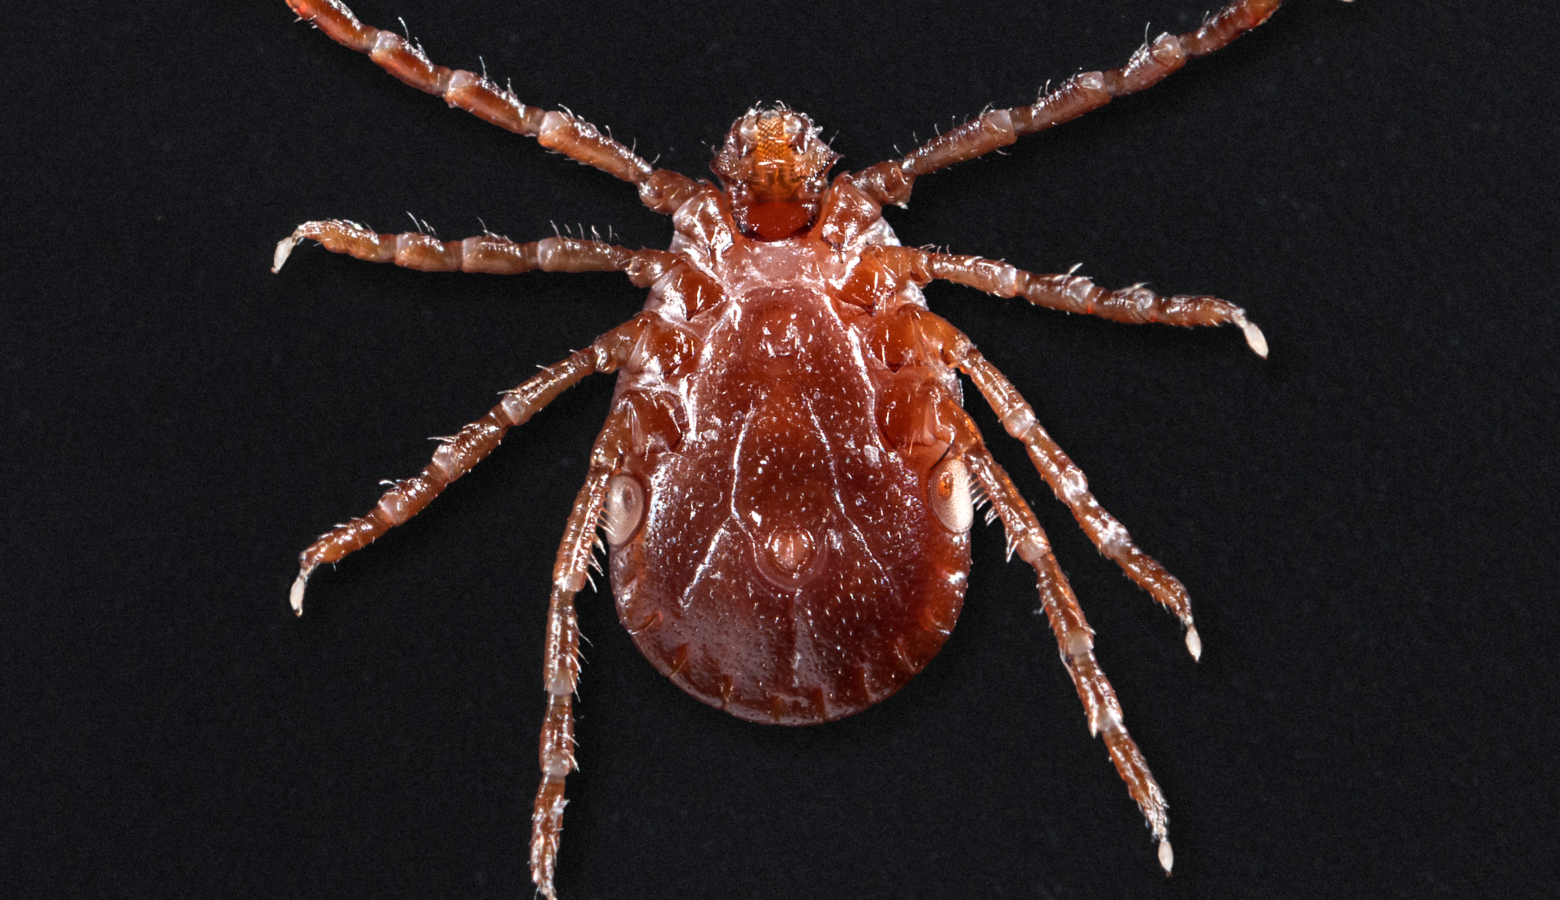 The underside of a female Asian longhorned tick. (James Gathany/Wikimedia Commons)